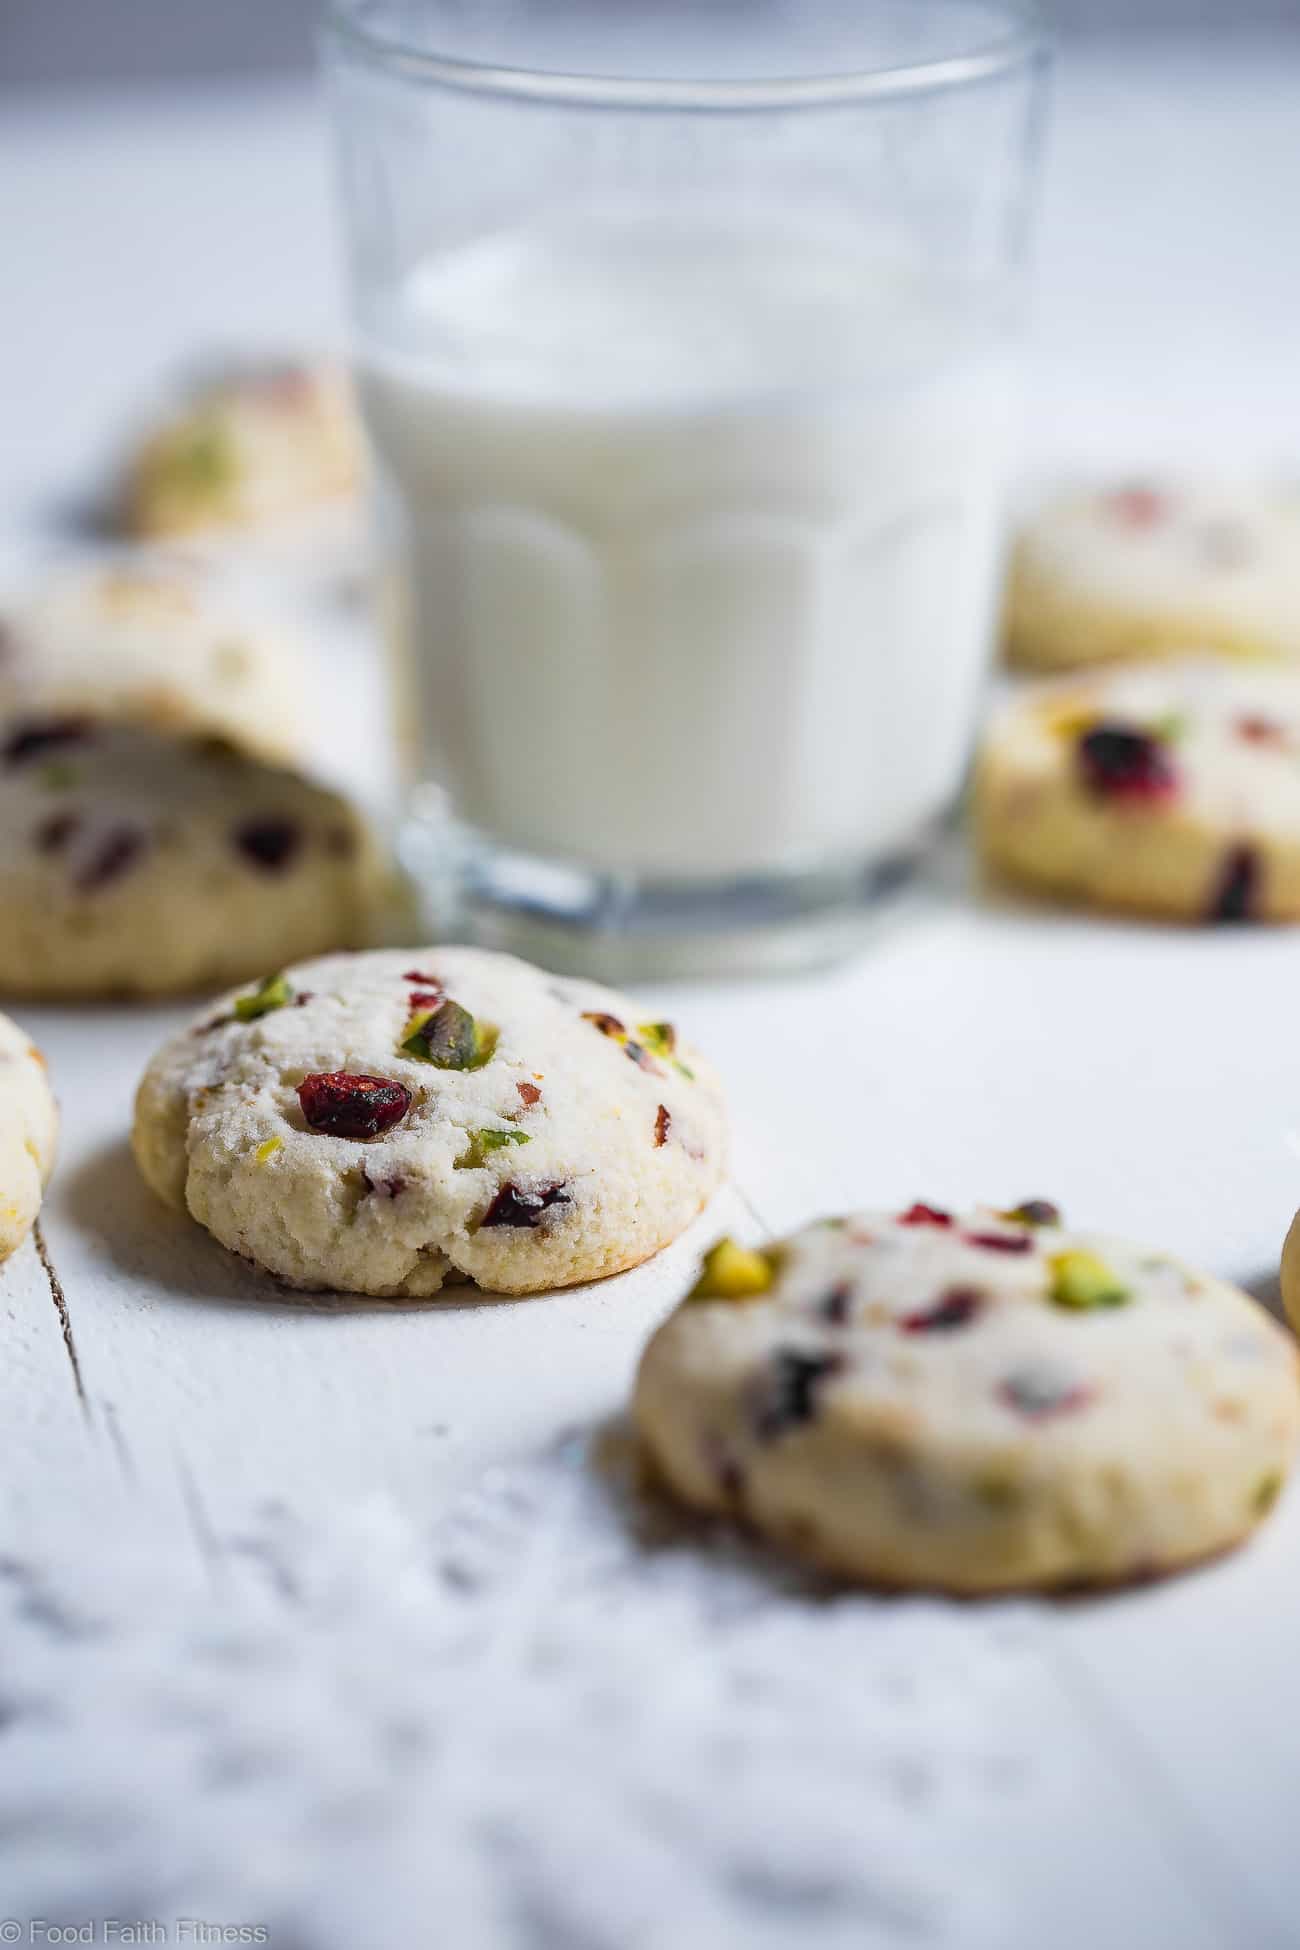 Sugar Free Chewy Sugar Cookies Recipe - These Soft and chewy sugar free sugar cookies have tangy and crunchy cranberries and pistachios! They're a healthier Christmas treat for only 95 calories! | Foodfaithfitness.com | @FoodFaithFit